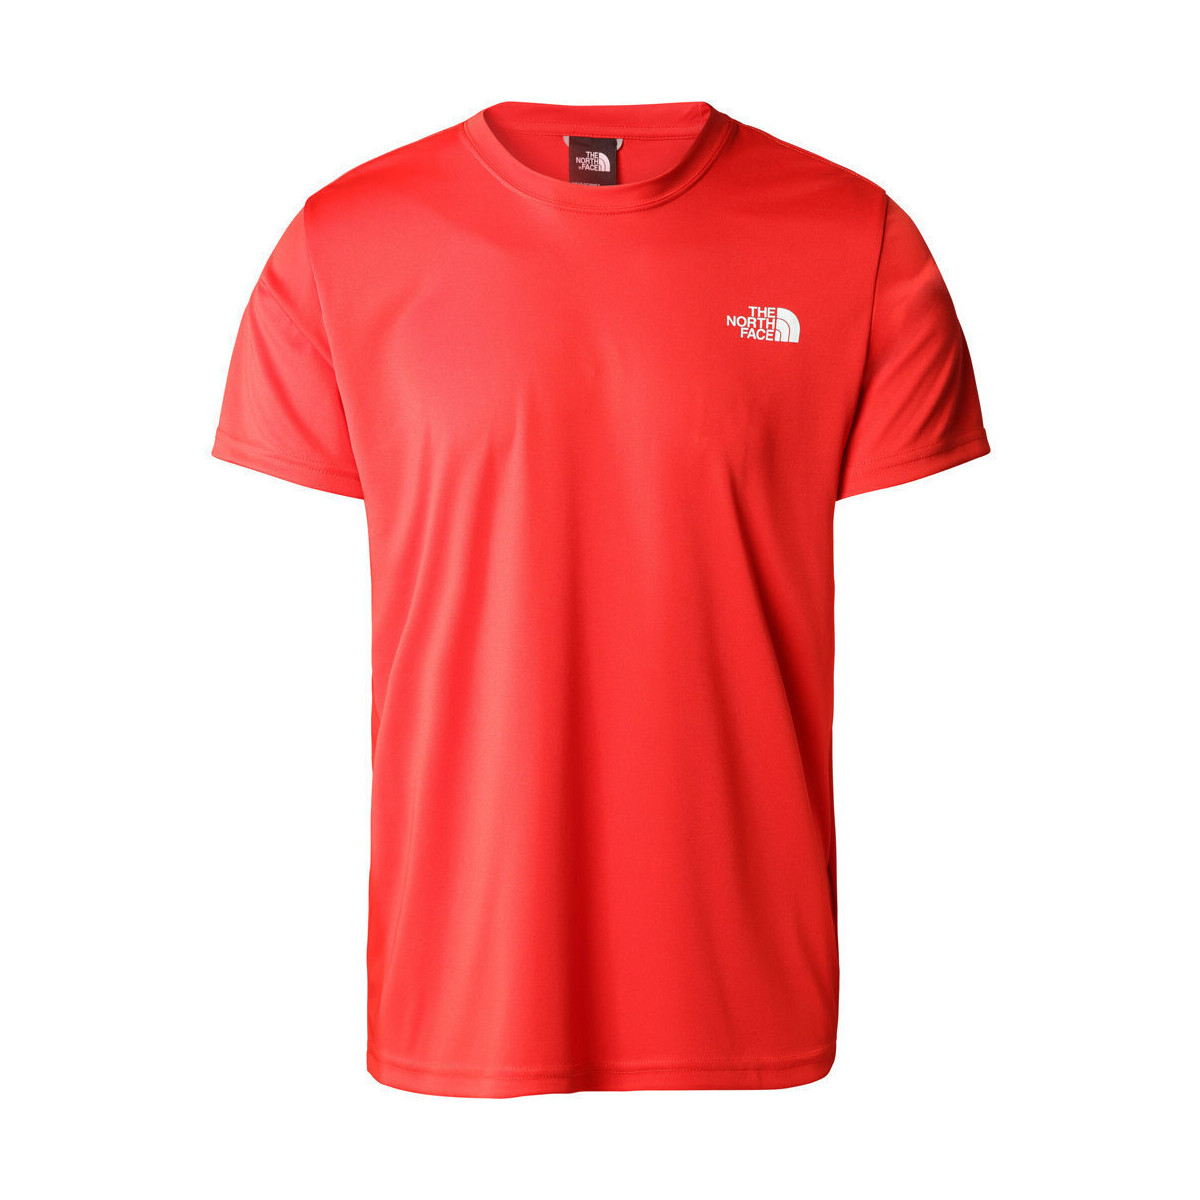 Vêtements Homme Chemises manches courtes The North Face M REAXION RED BOX TEE - EU Rouge